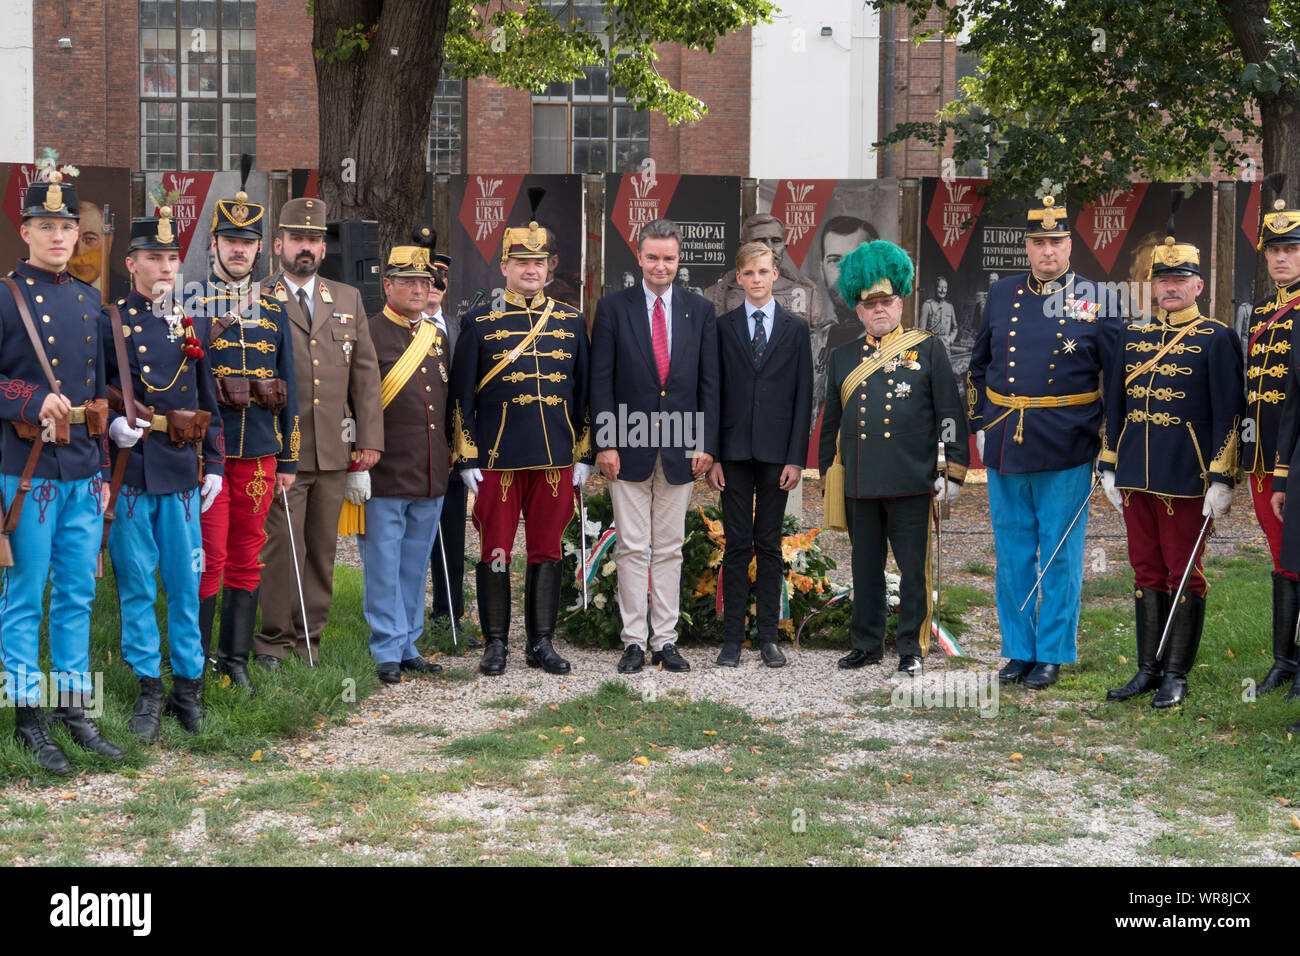 Budapest, Hungary - Aug 17, 2019: Georg von Habsburg  attendon the Remembrance ceremony of  Charles IV the last King of Hungary, Budapest, Hungary. Stock Photo